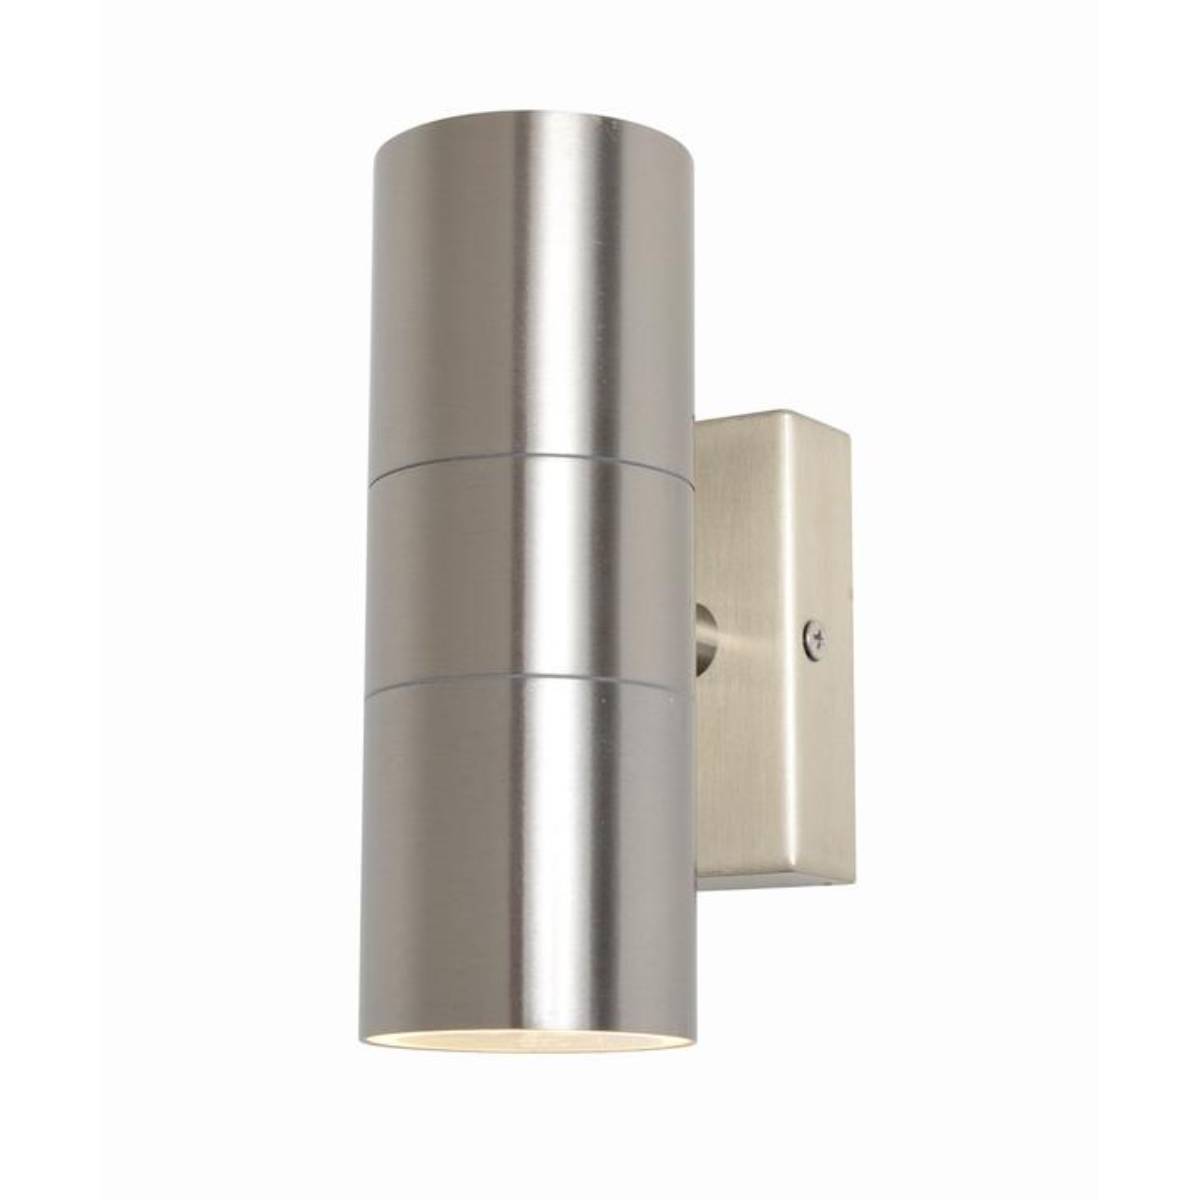 Forum Zinc ZN-20941-SST Leto Up/Down Wall Light - Stainless Steel (11984)